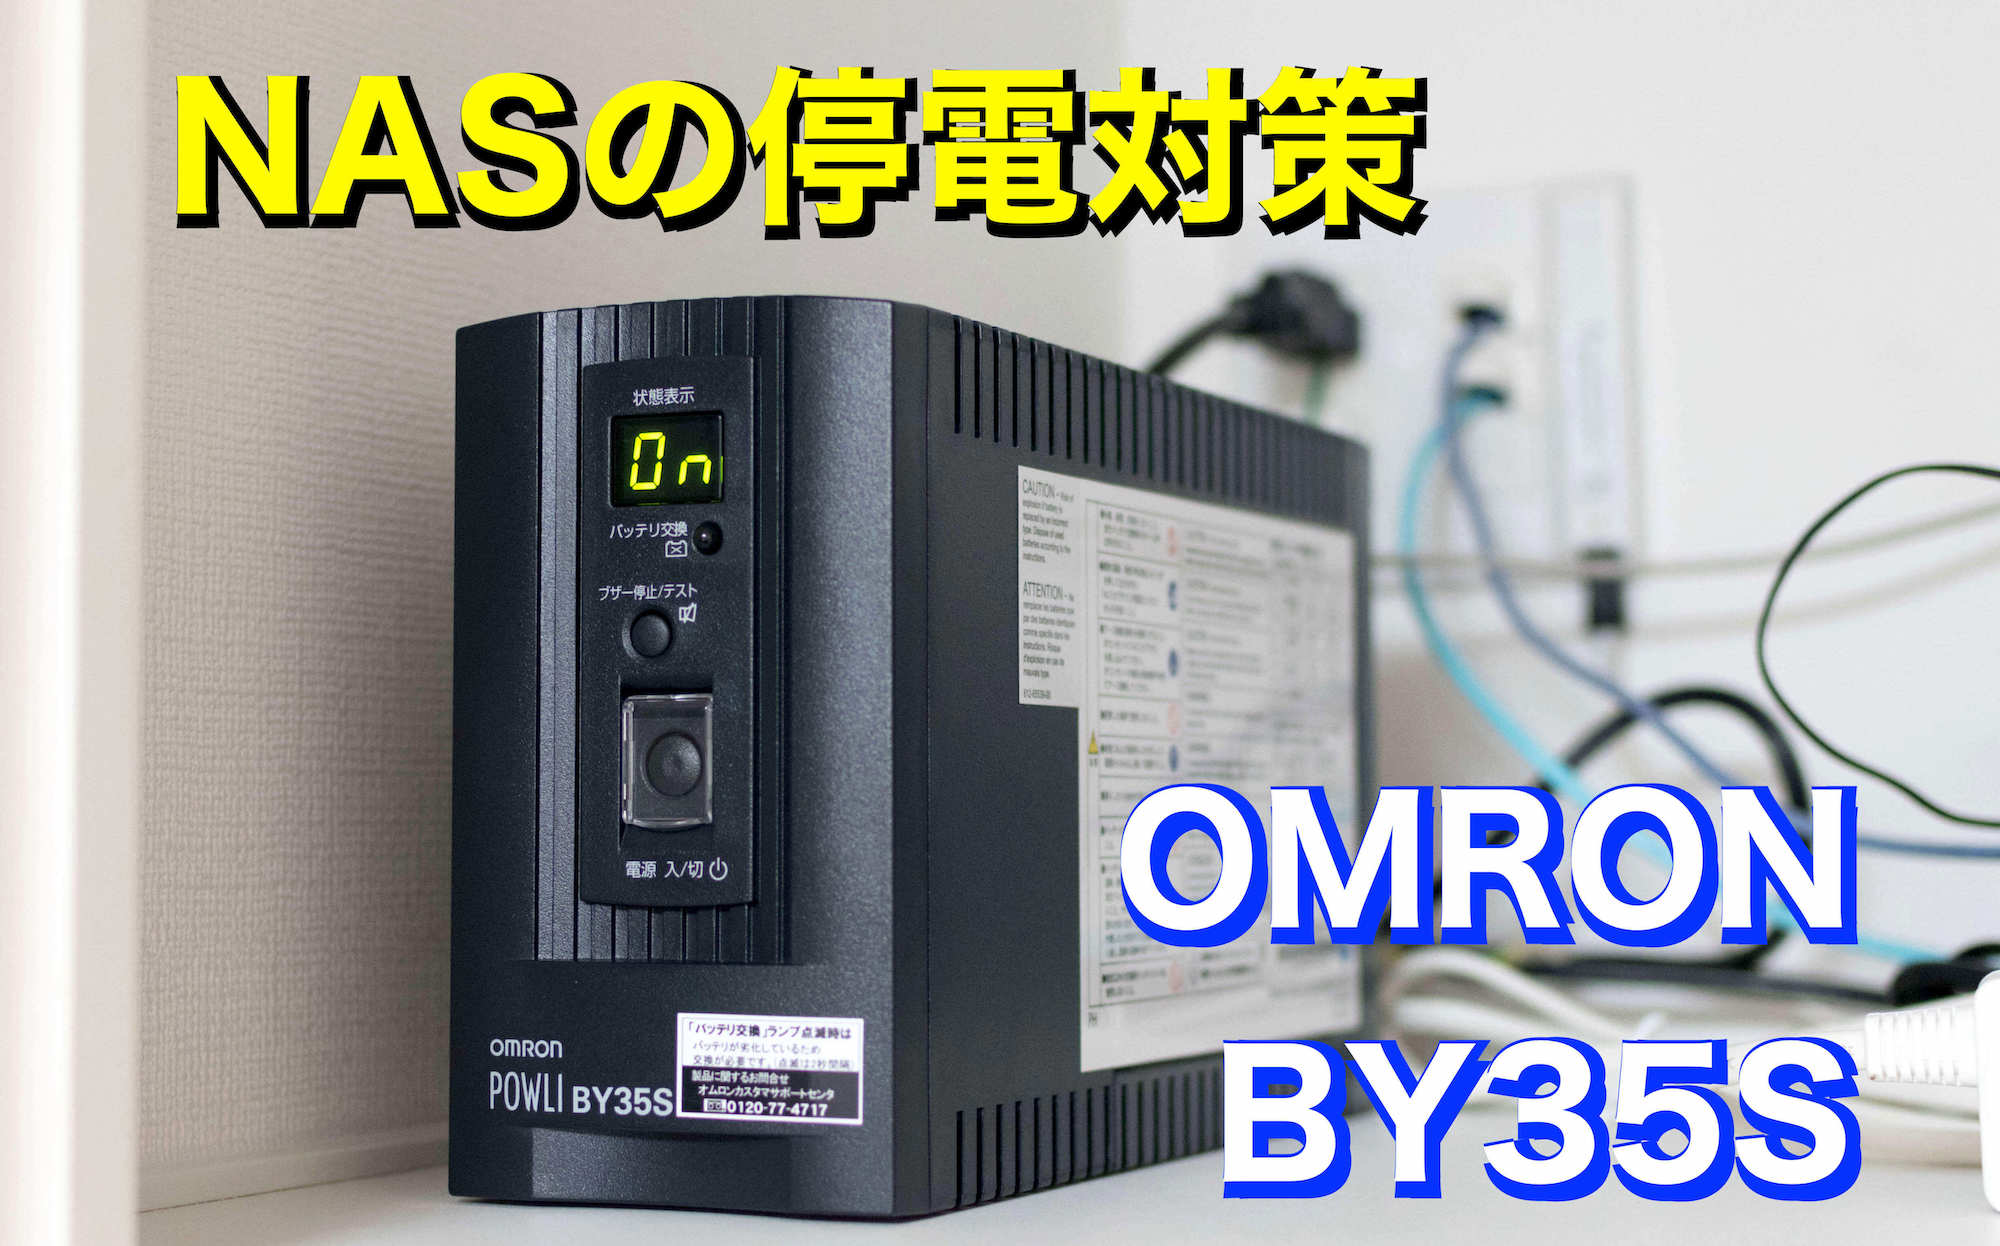 Synology NAS停電対策に】OMRON BY35Sを選んだ理由【無停電電源装置UPS】 | スム